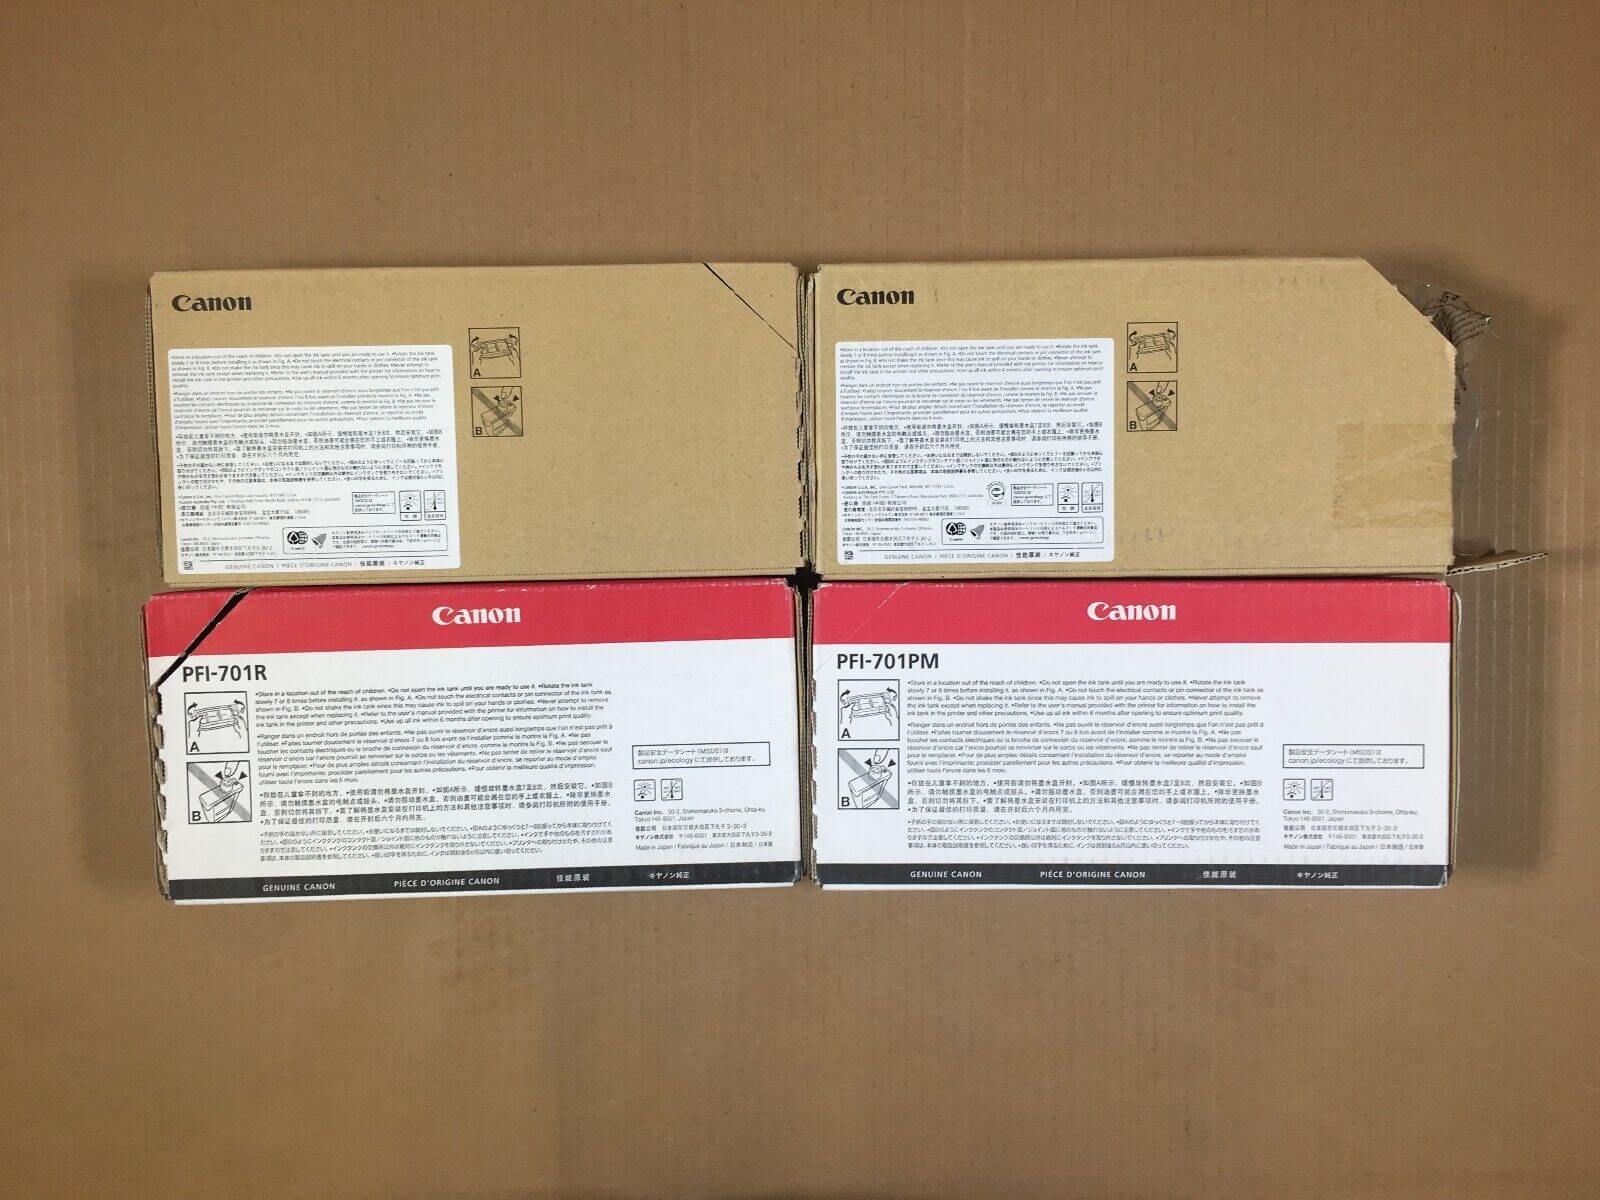 4 Canon PFI-701 ink cartridges imagePROGRAF ipf8000 8000s EXPIRED FedEx 2Day!! - copier-clearance-center